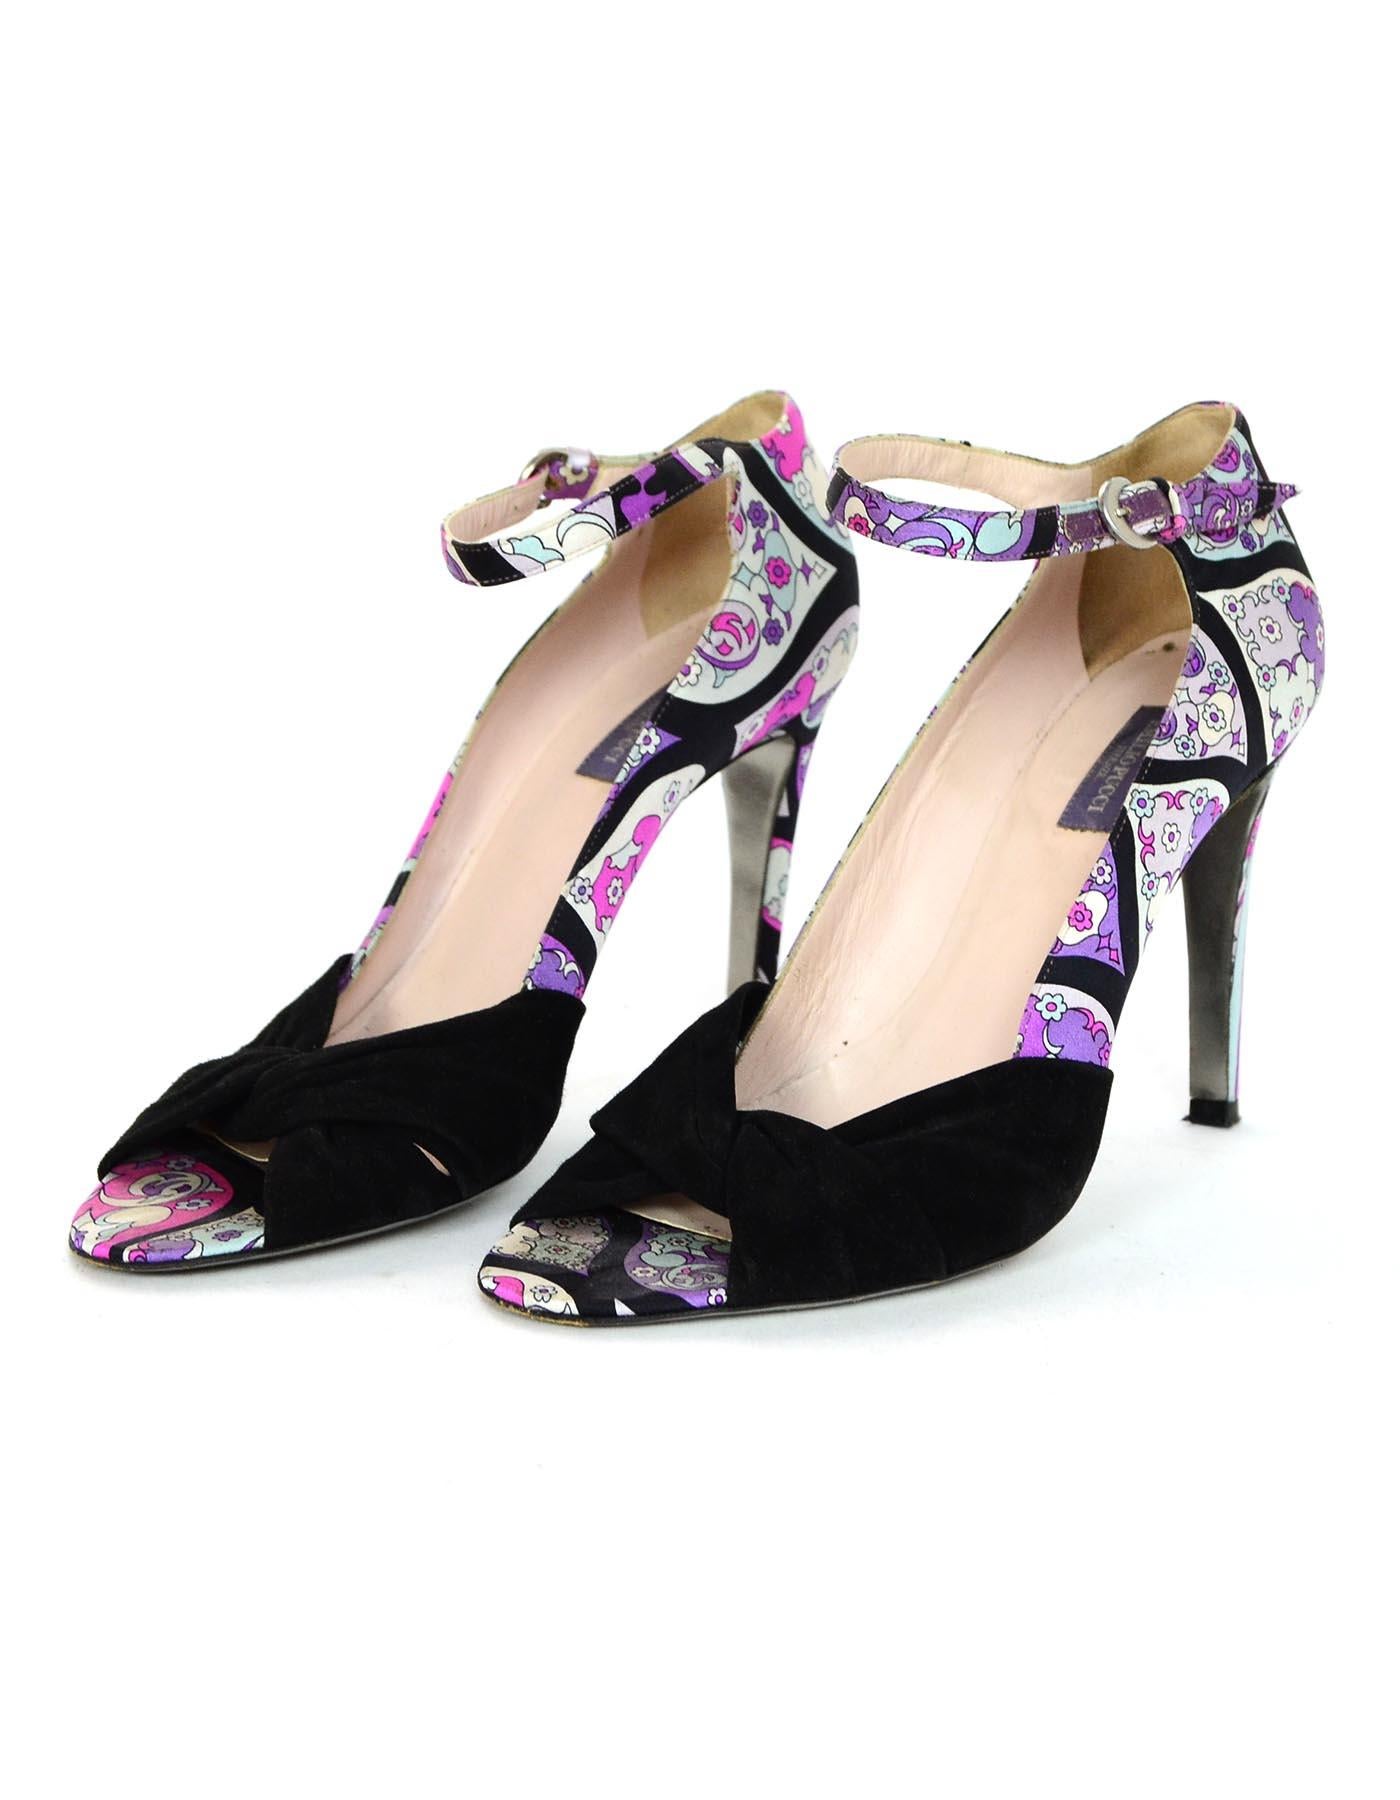 Emilio Pucci Printed Fabric Heels Shoes W/ Black Suede Sz 39

Made In: Italy
Color: Pink, purple, white, and black
Hardware: Silvertone
Materials: Fabric and suede
Closure/Opening:  Side ankle buckle
Overall Condition: Excellent pre-owned condition